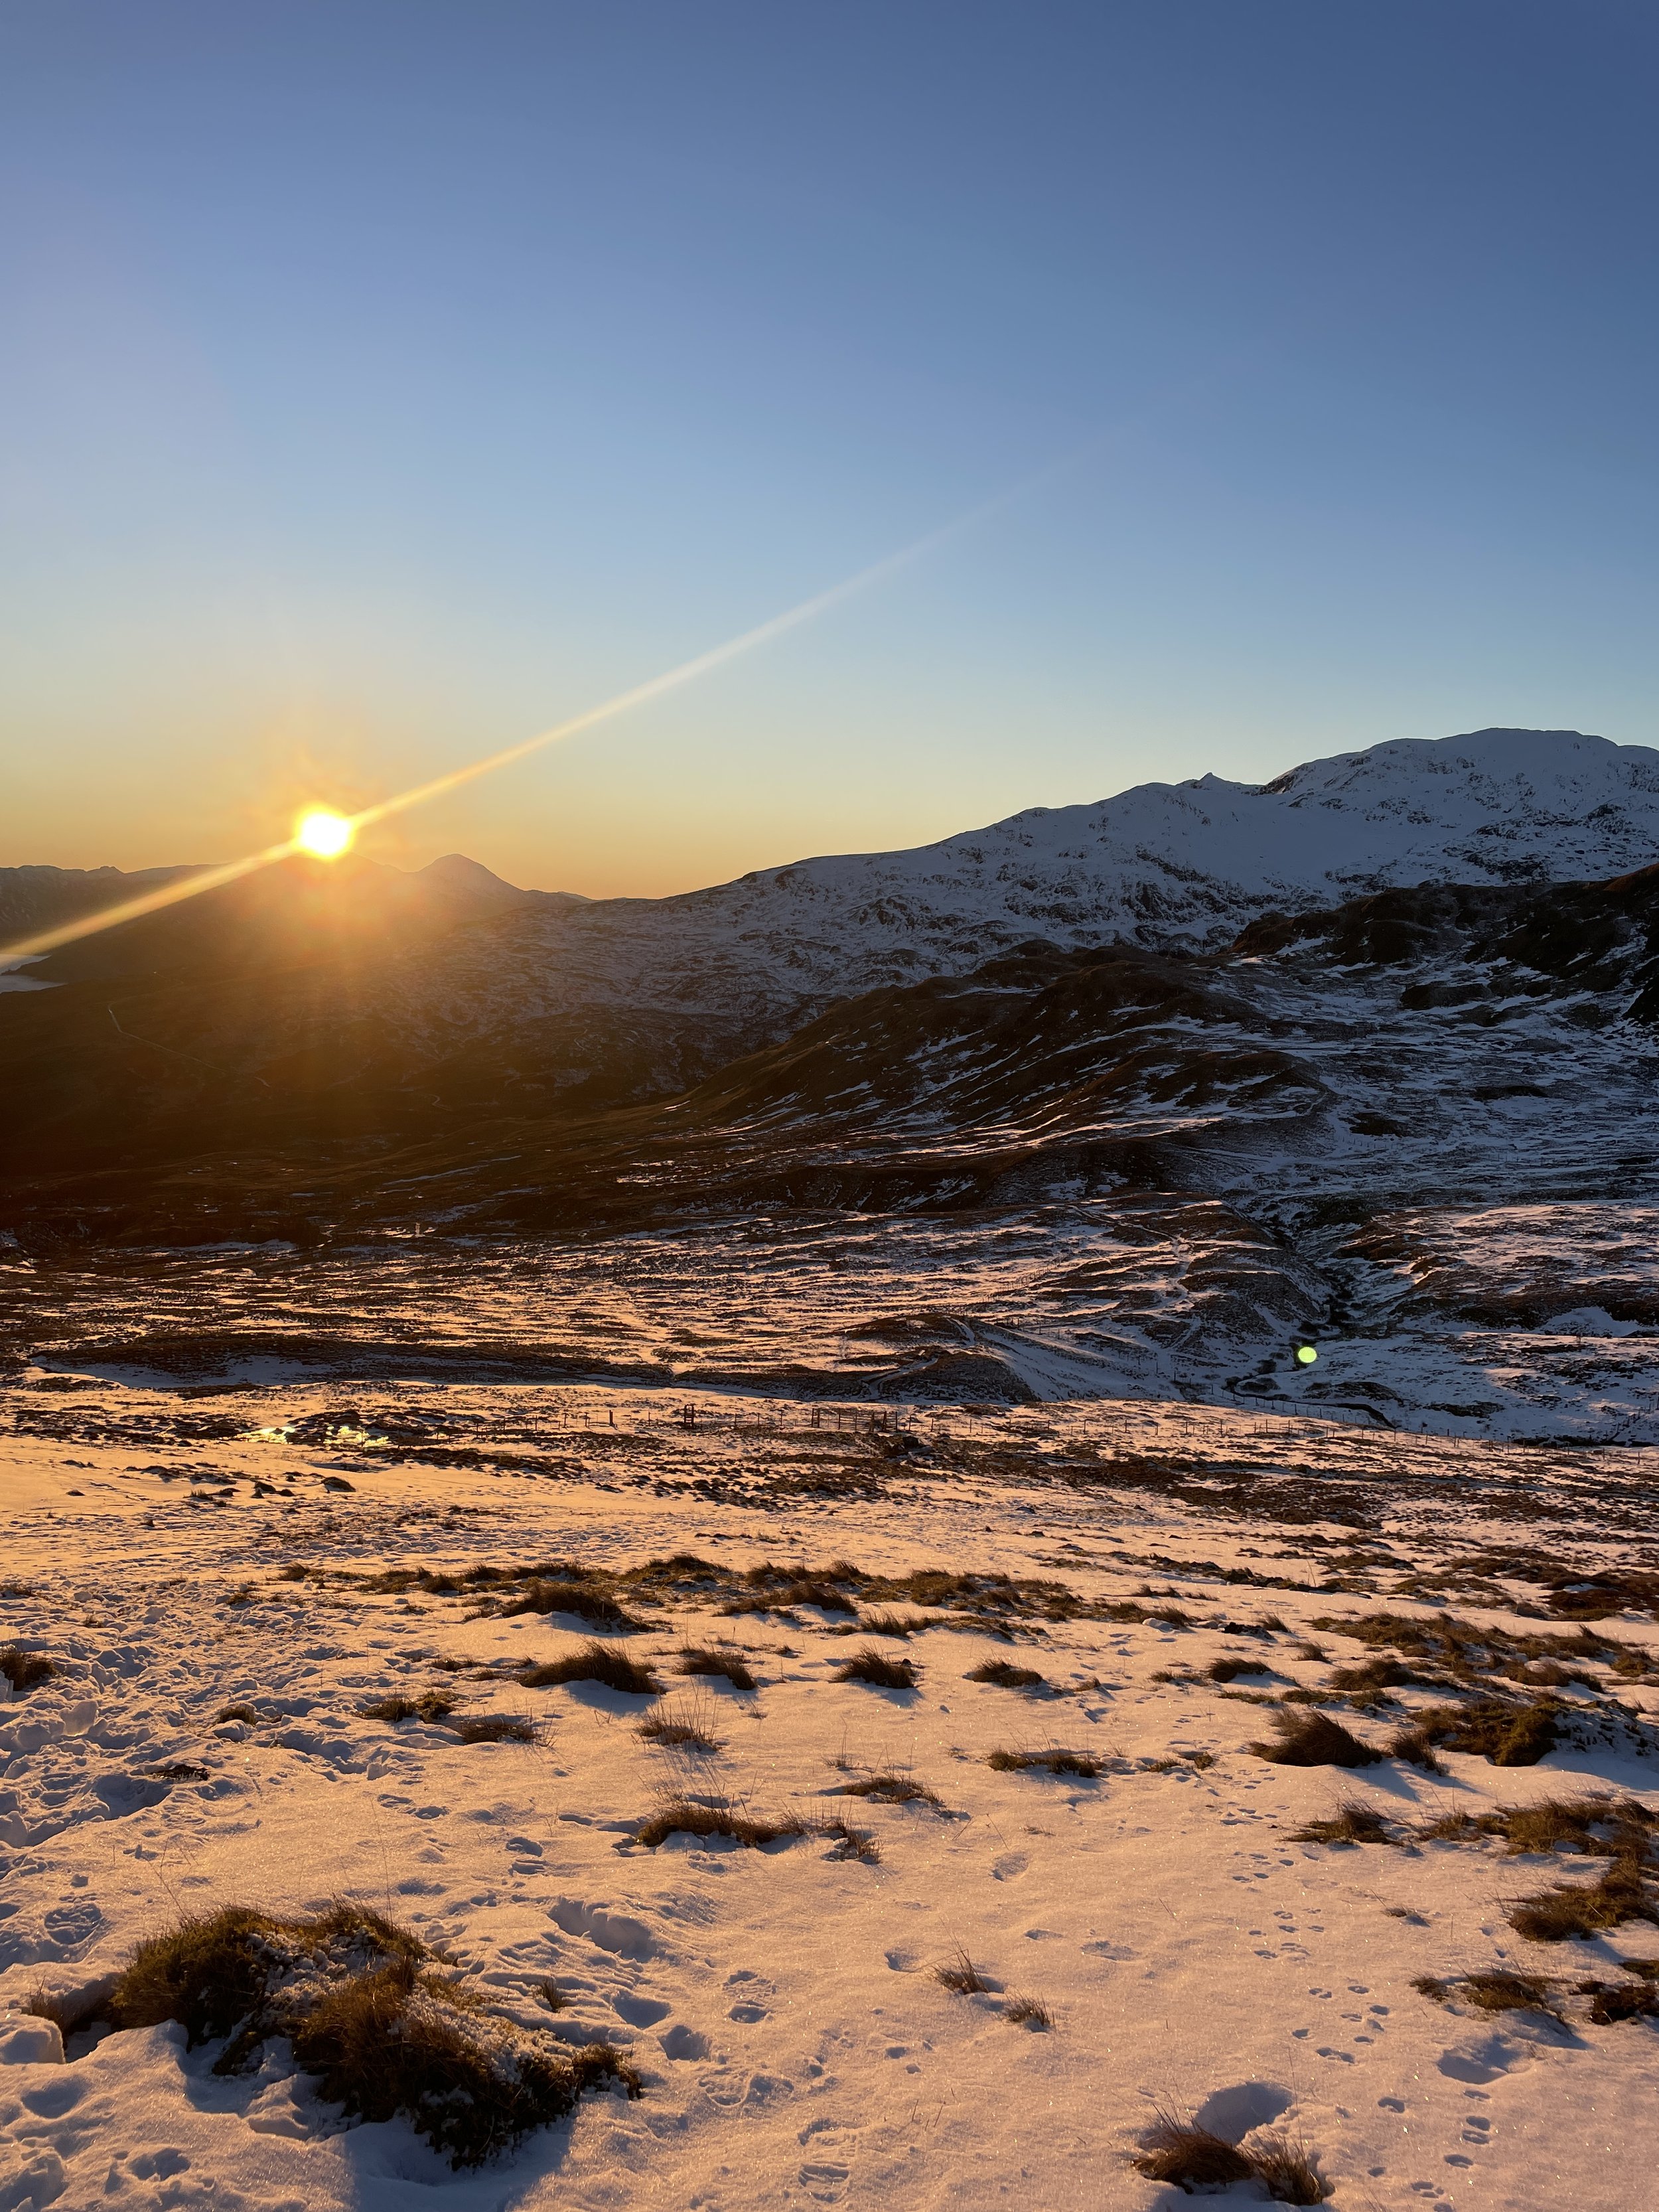 From Ben Lawers